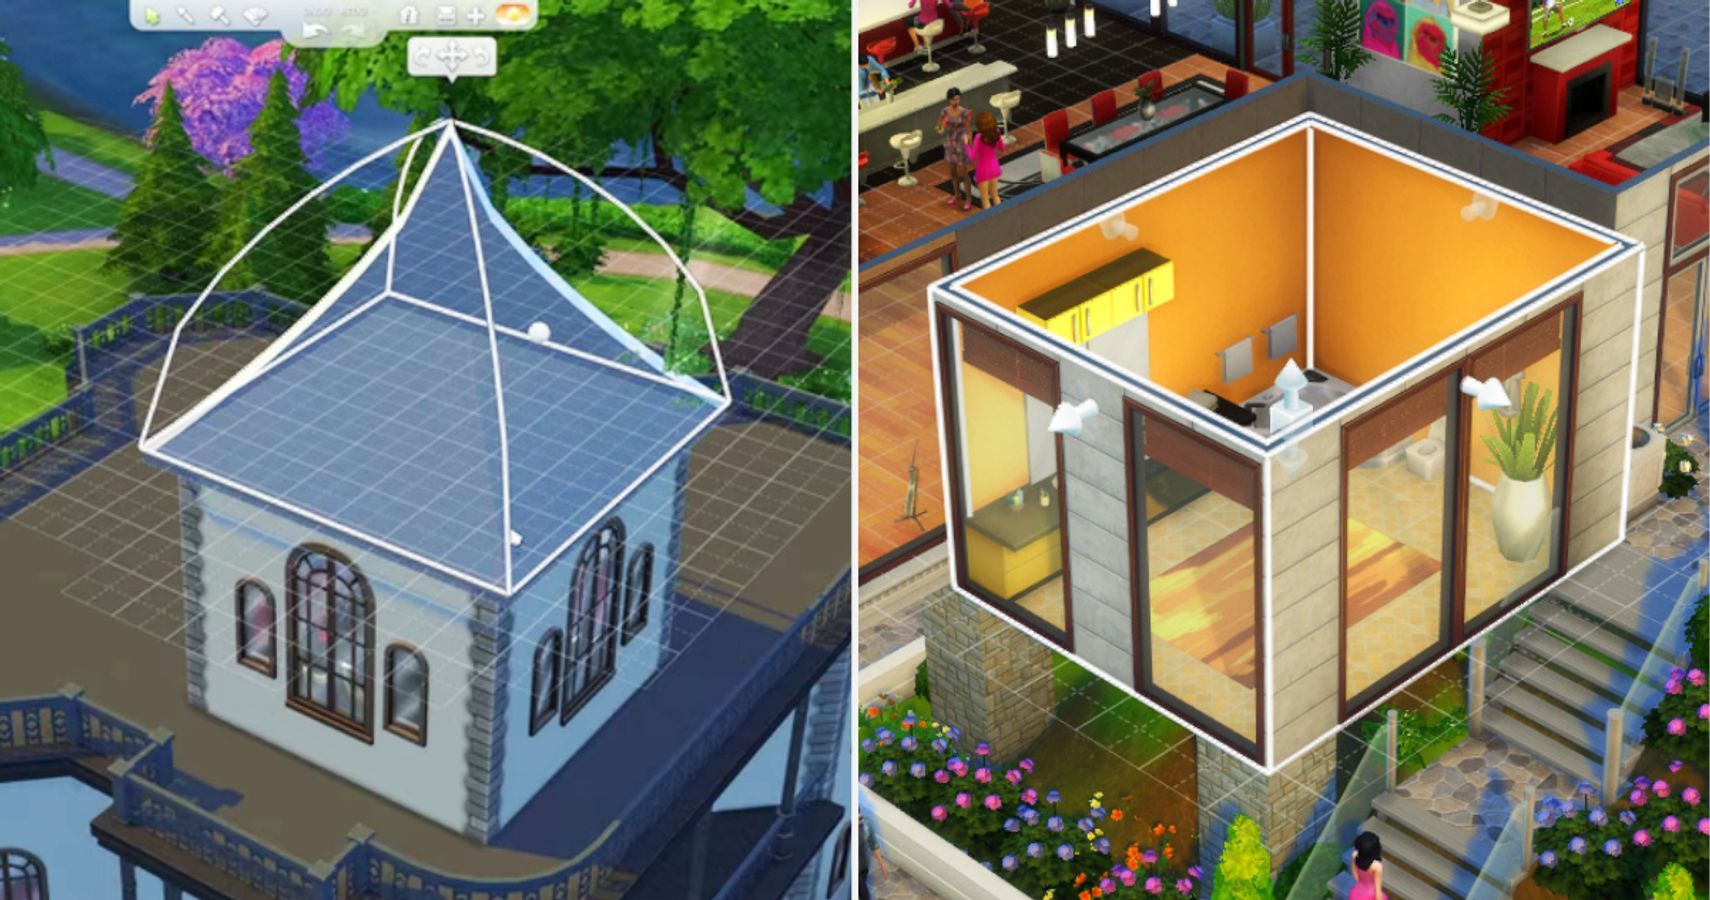 Every Sims 4 builder should know these cheats. A summary of the